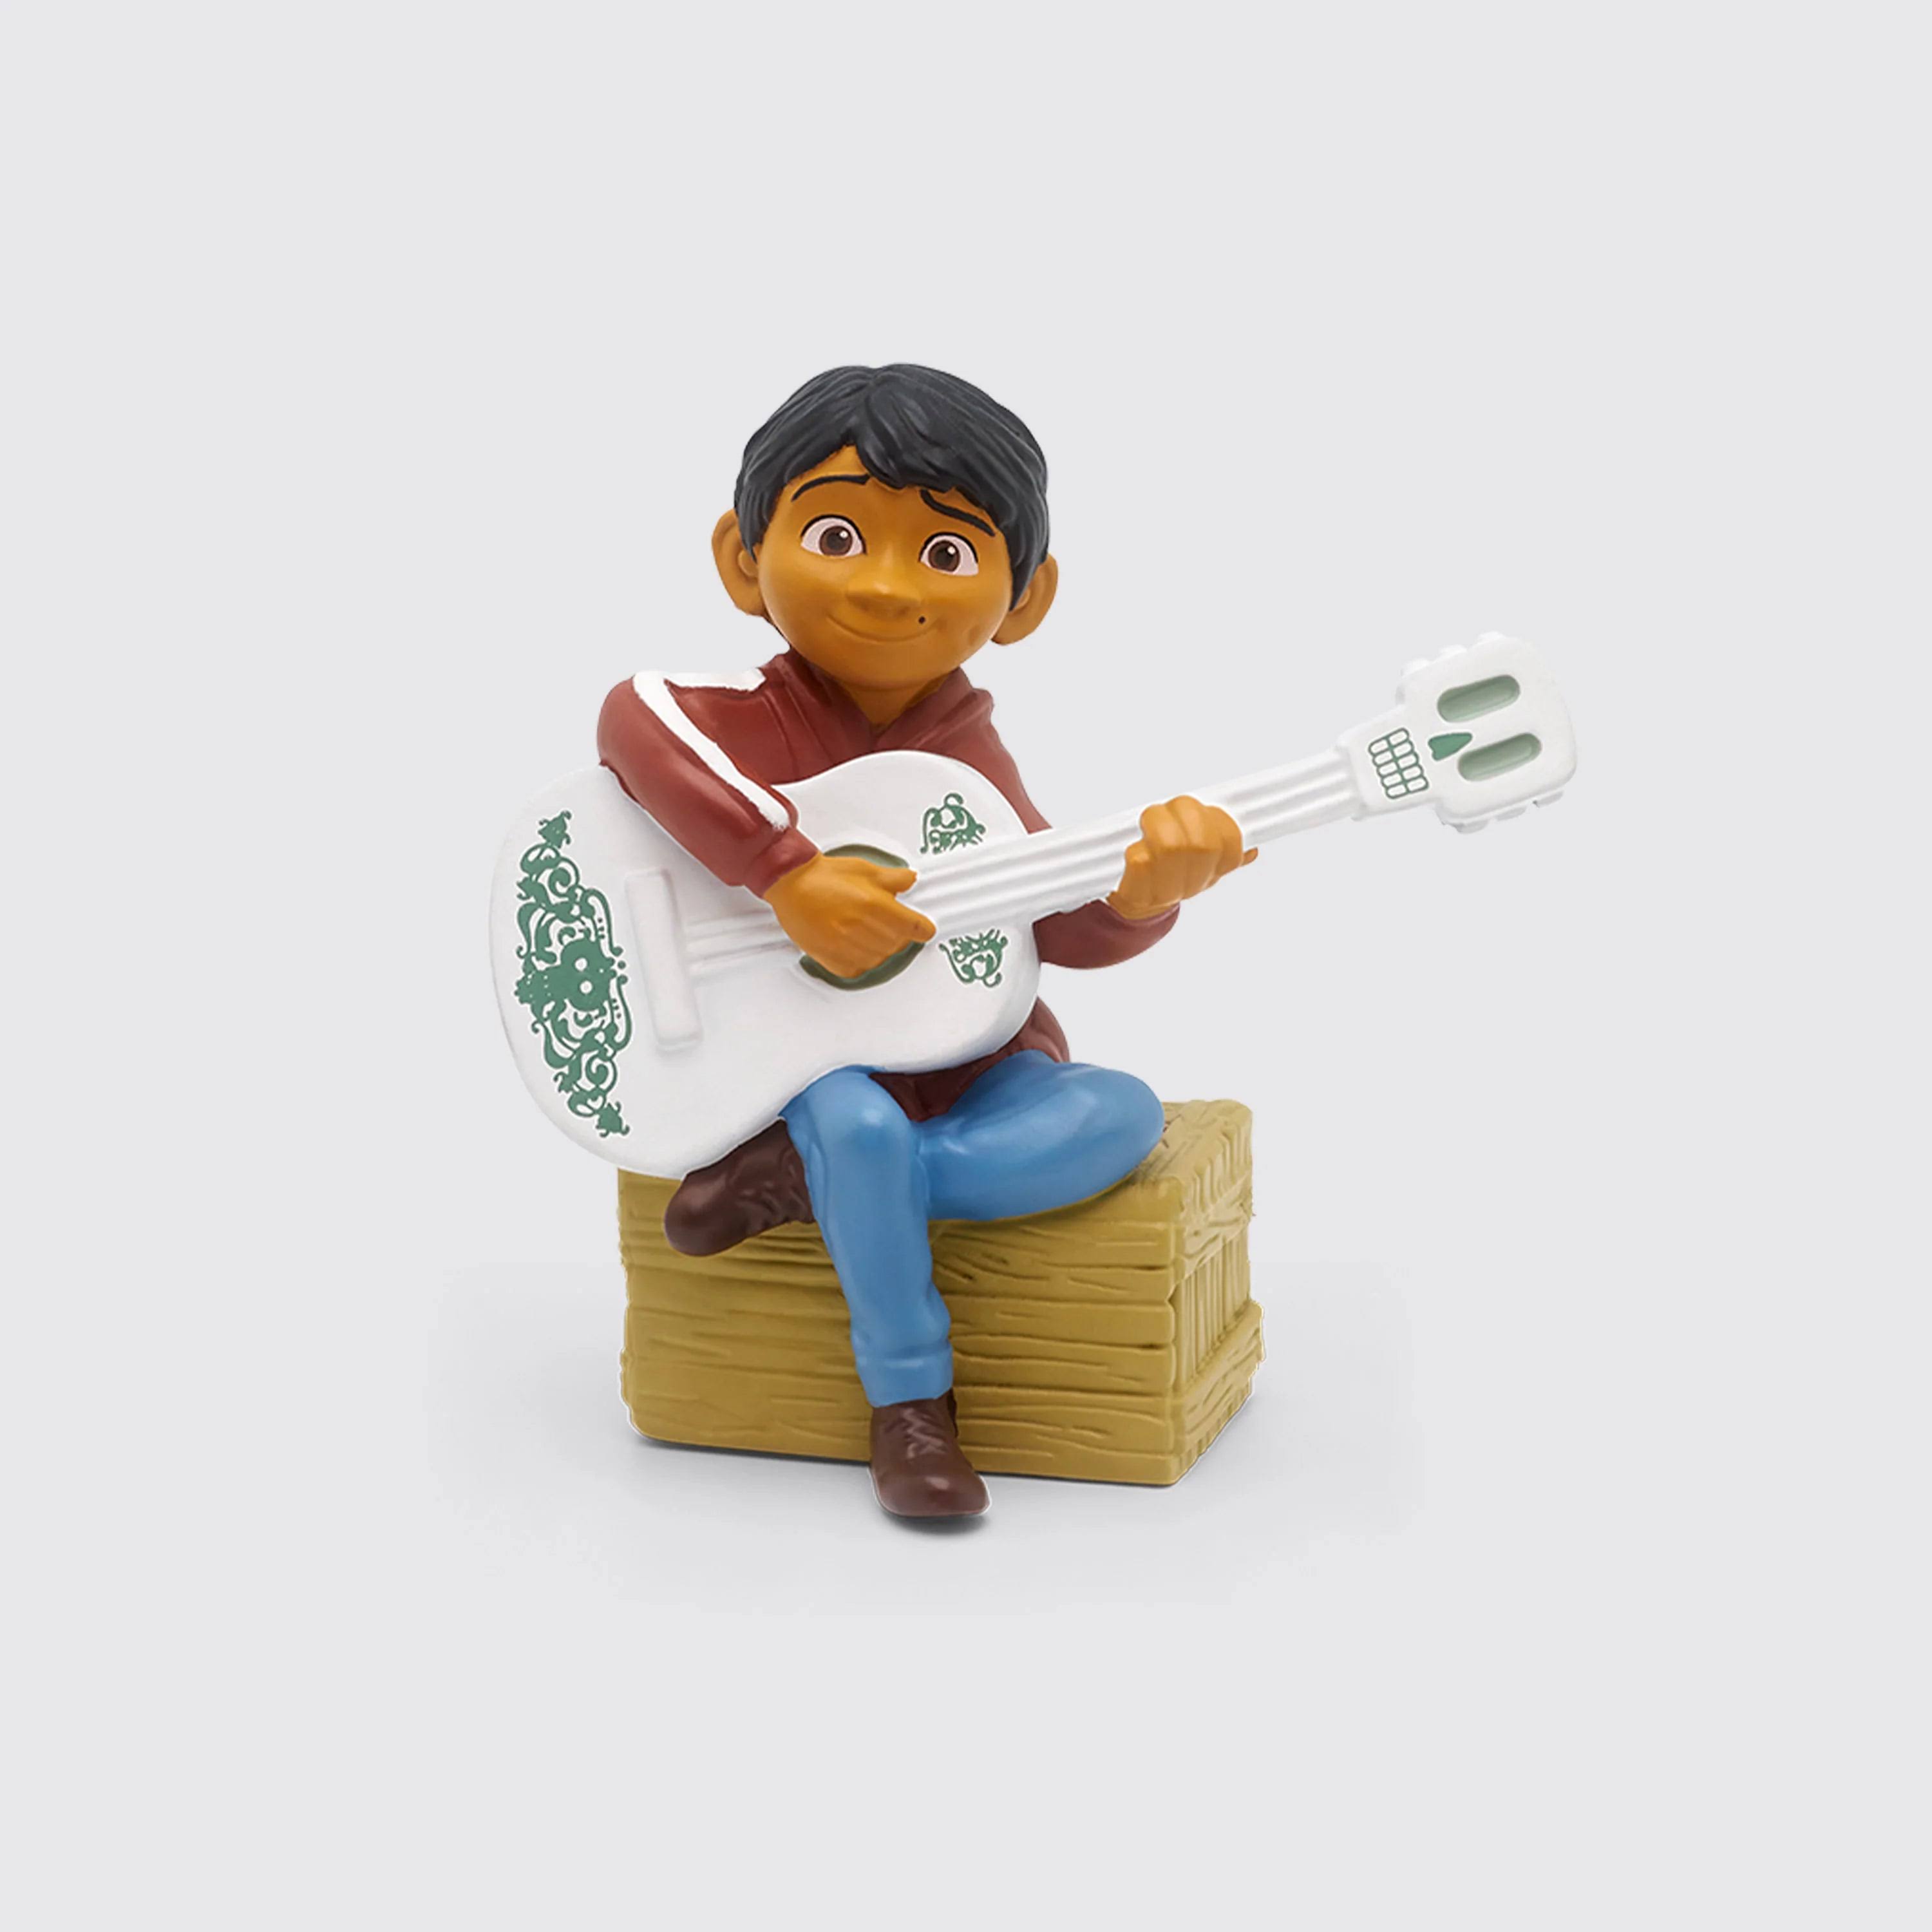 Tonies Miguel Audio Play Character from Disney and Pixar's Coco